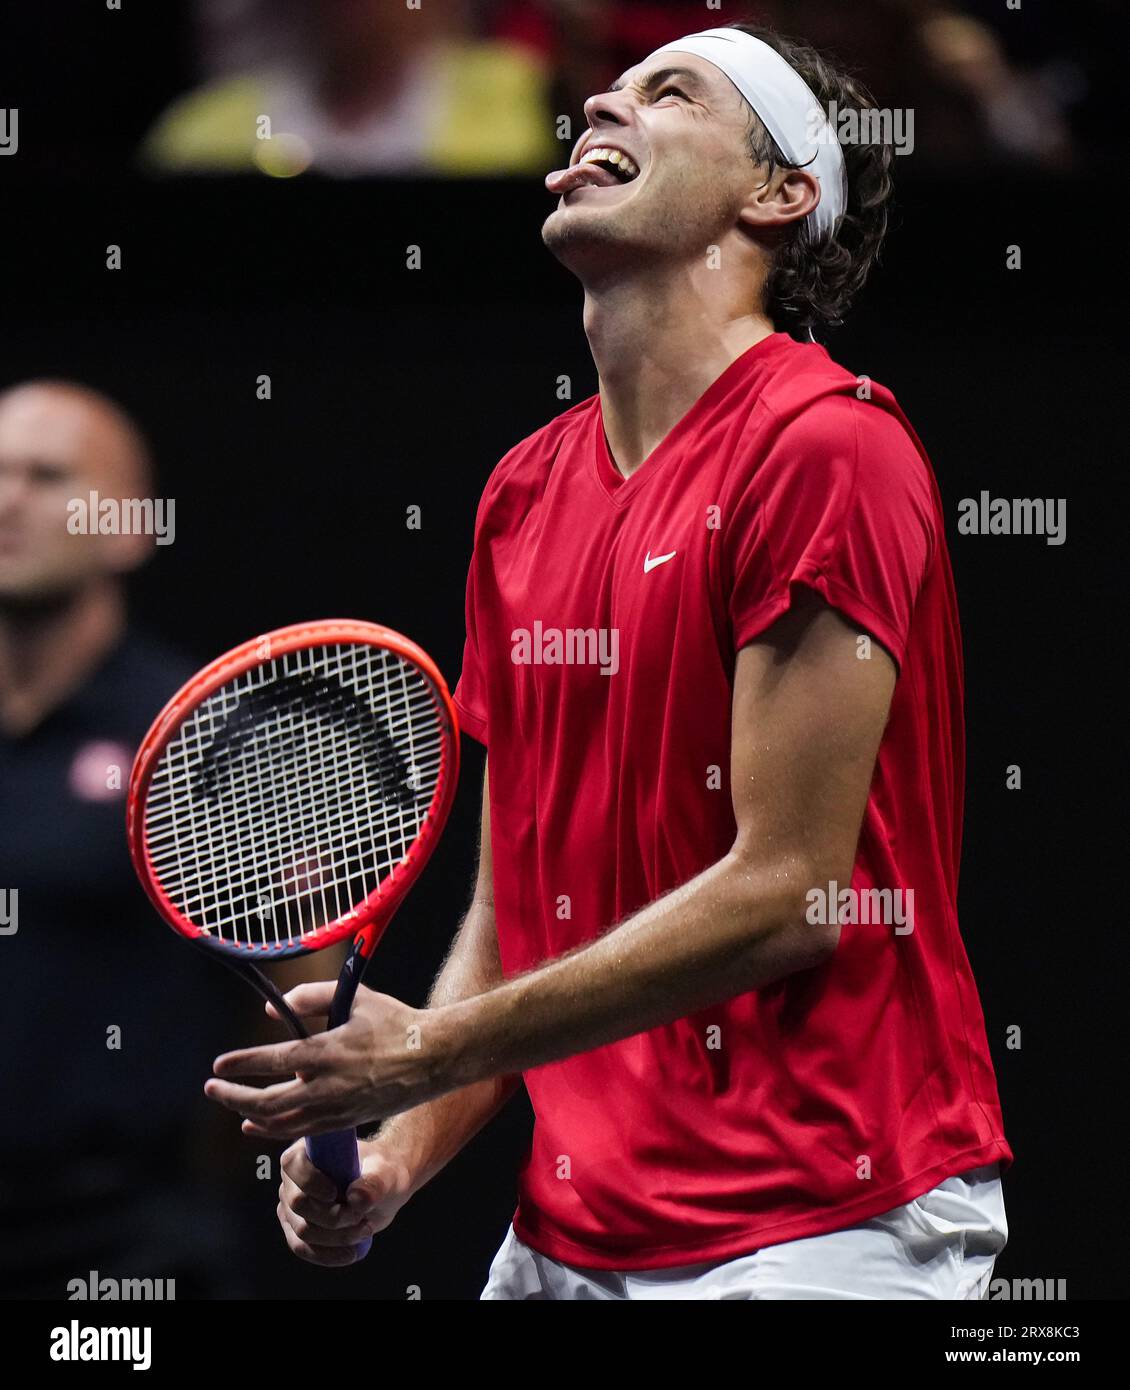 Team Worlds Taylor Fritz reacts after playing a point against Team Europes Andrey Rublev during a Laver Cup tennis match Saturday, Sept